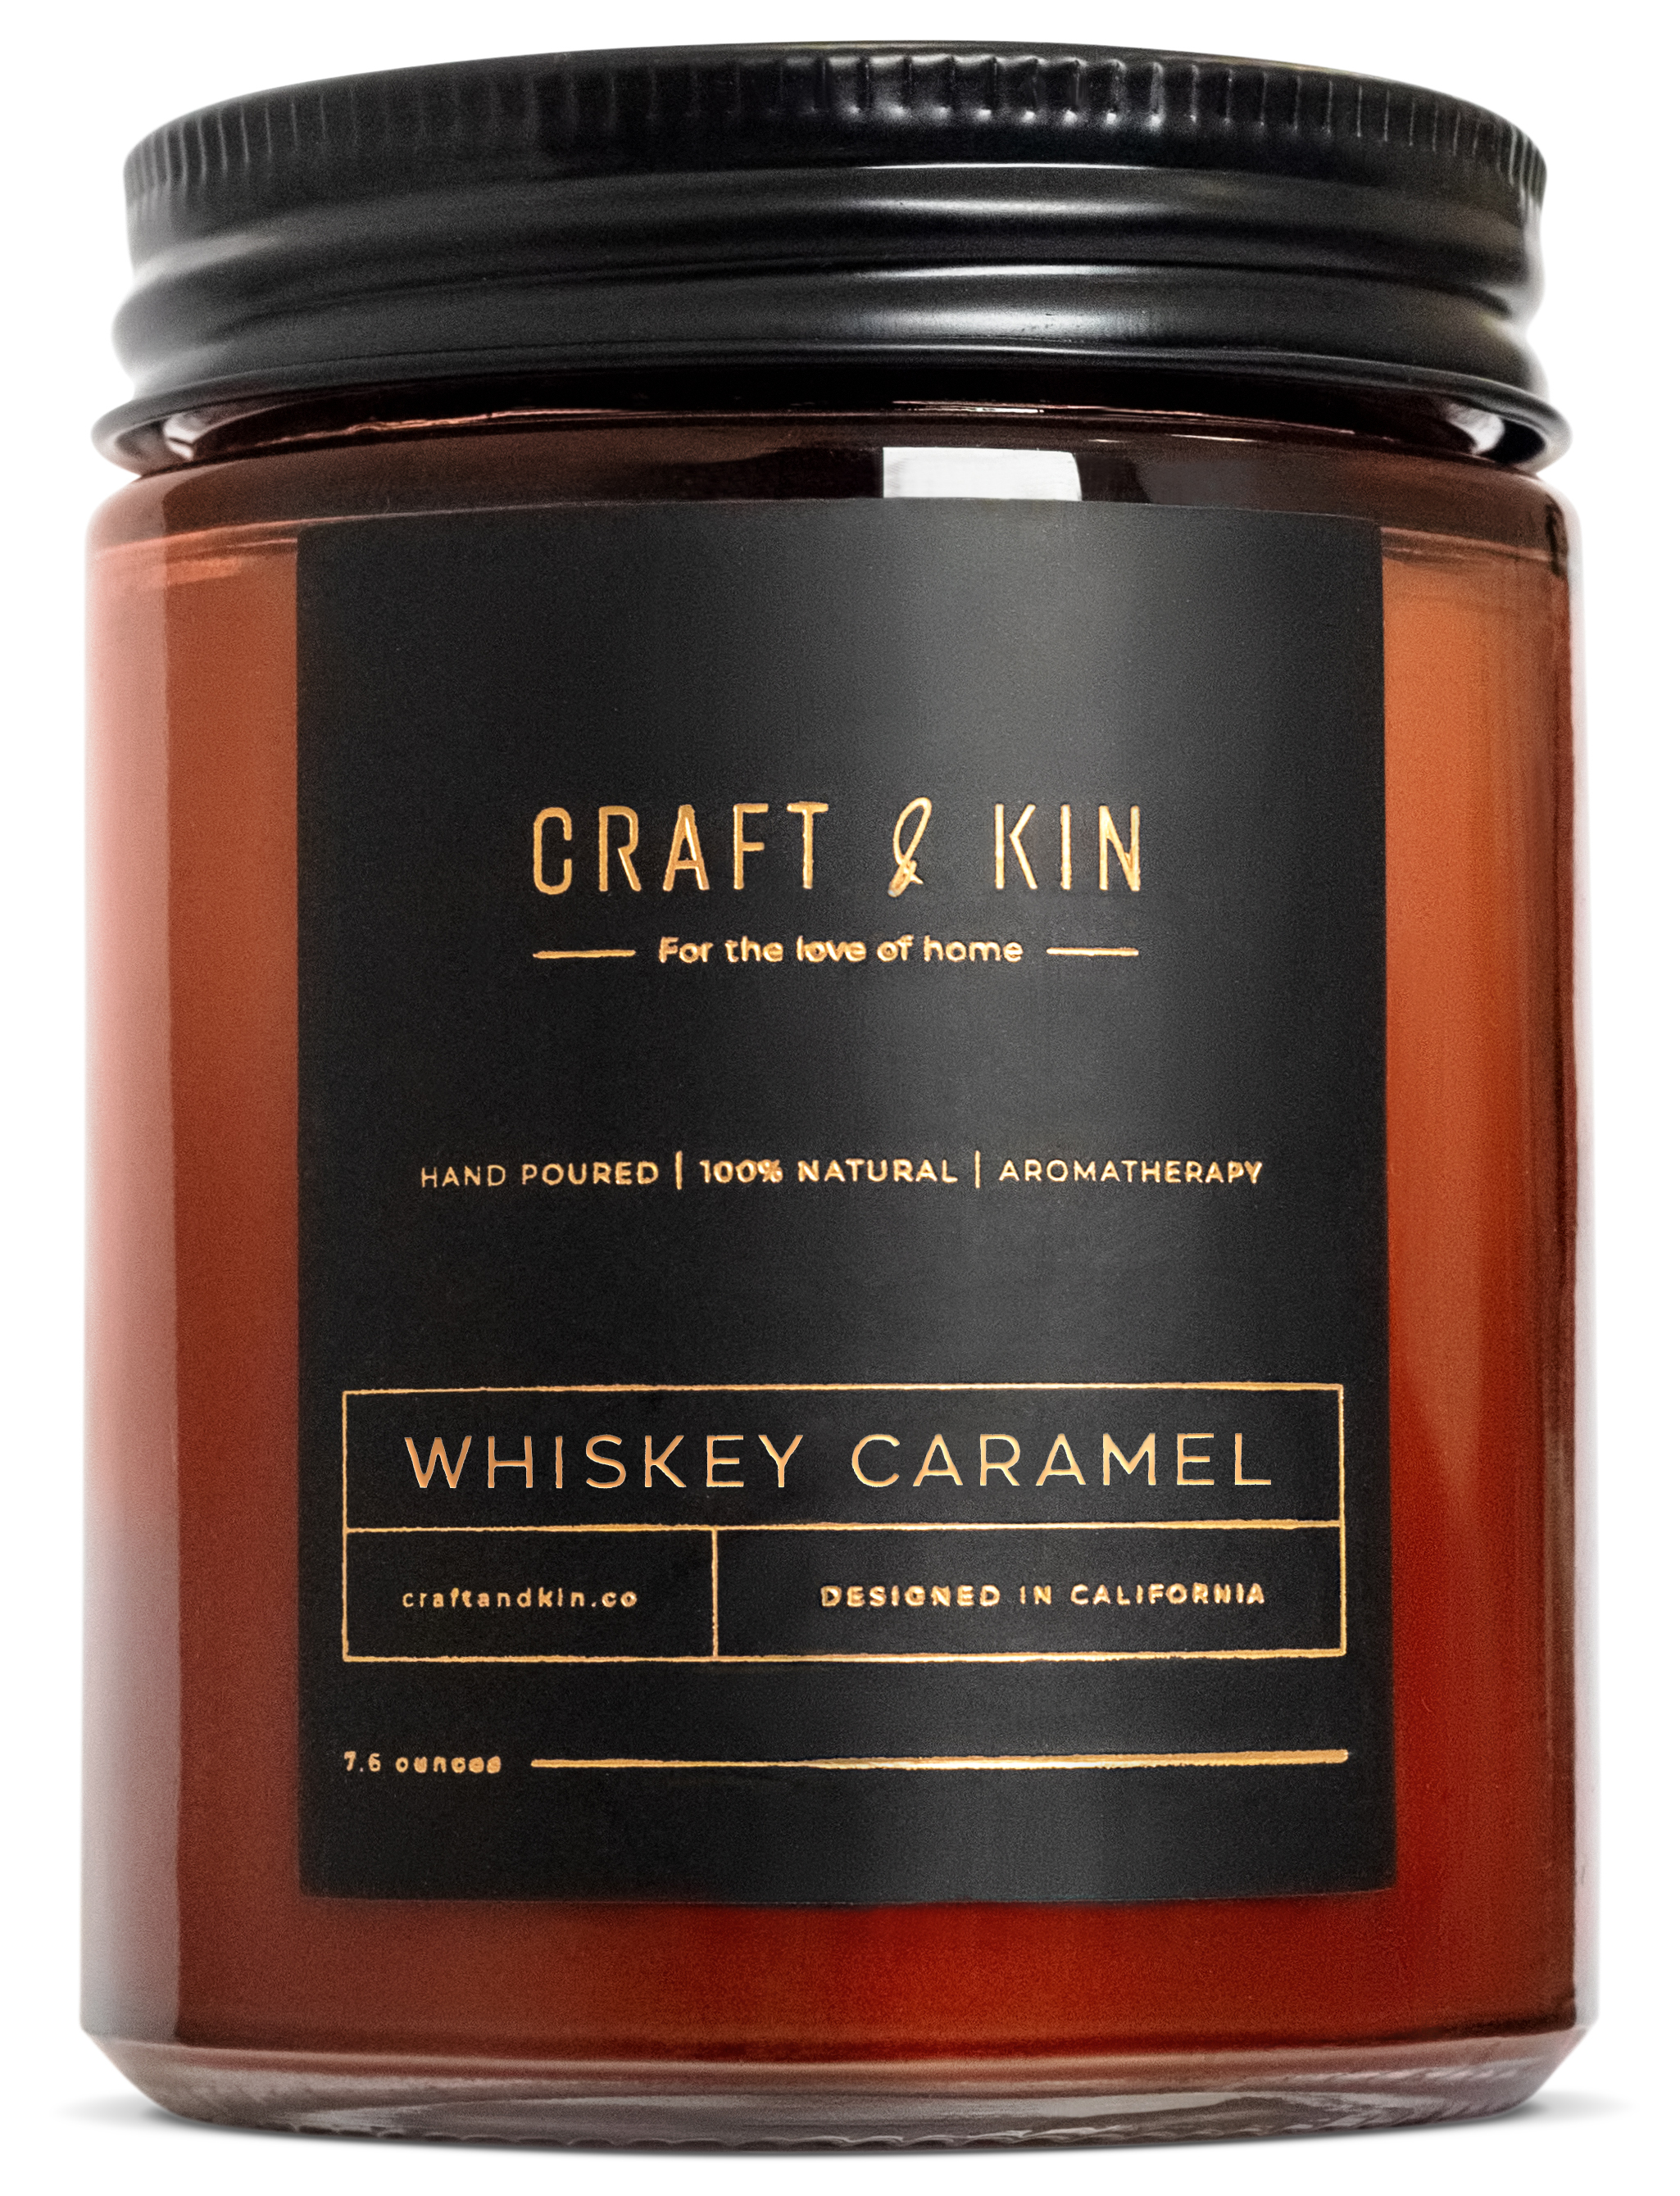 Scented Candles for Men | Premium Whiskey Caramel Scented Candle | All-Natural Whiskey Candle Soy Candles, Rustic Home Decor Scented Candles | Non-Toxic, Ultra Clean Burn Aromatherapy Amber Jar Candle - image 1 of 5